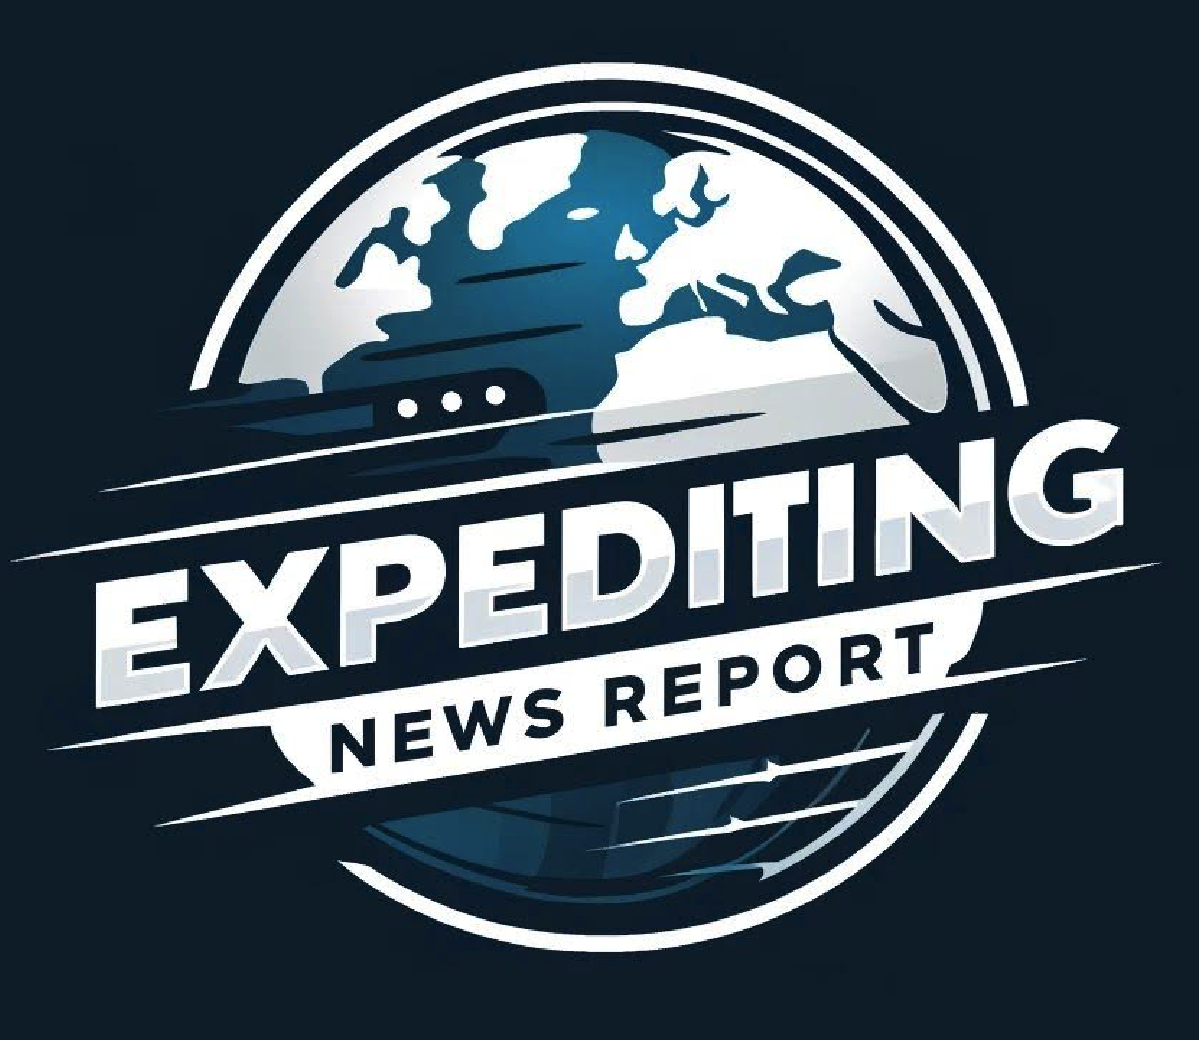 Expedited News Report